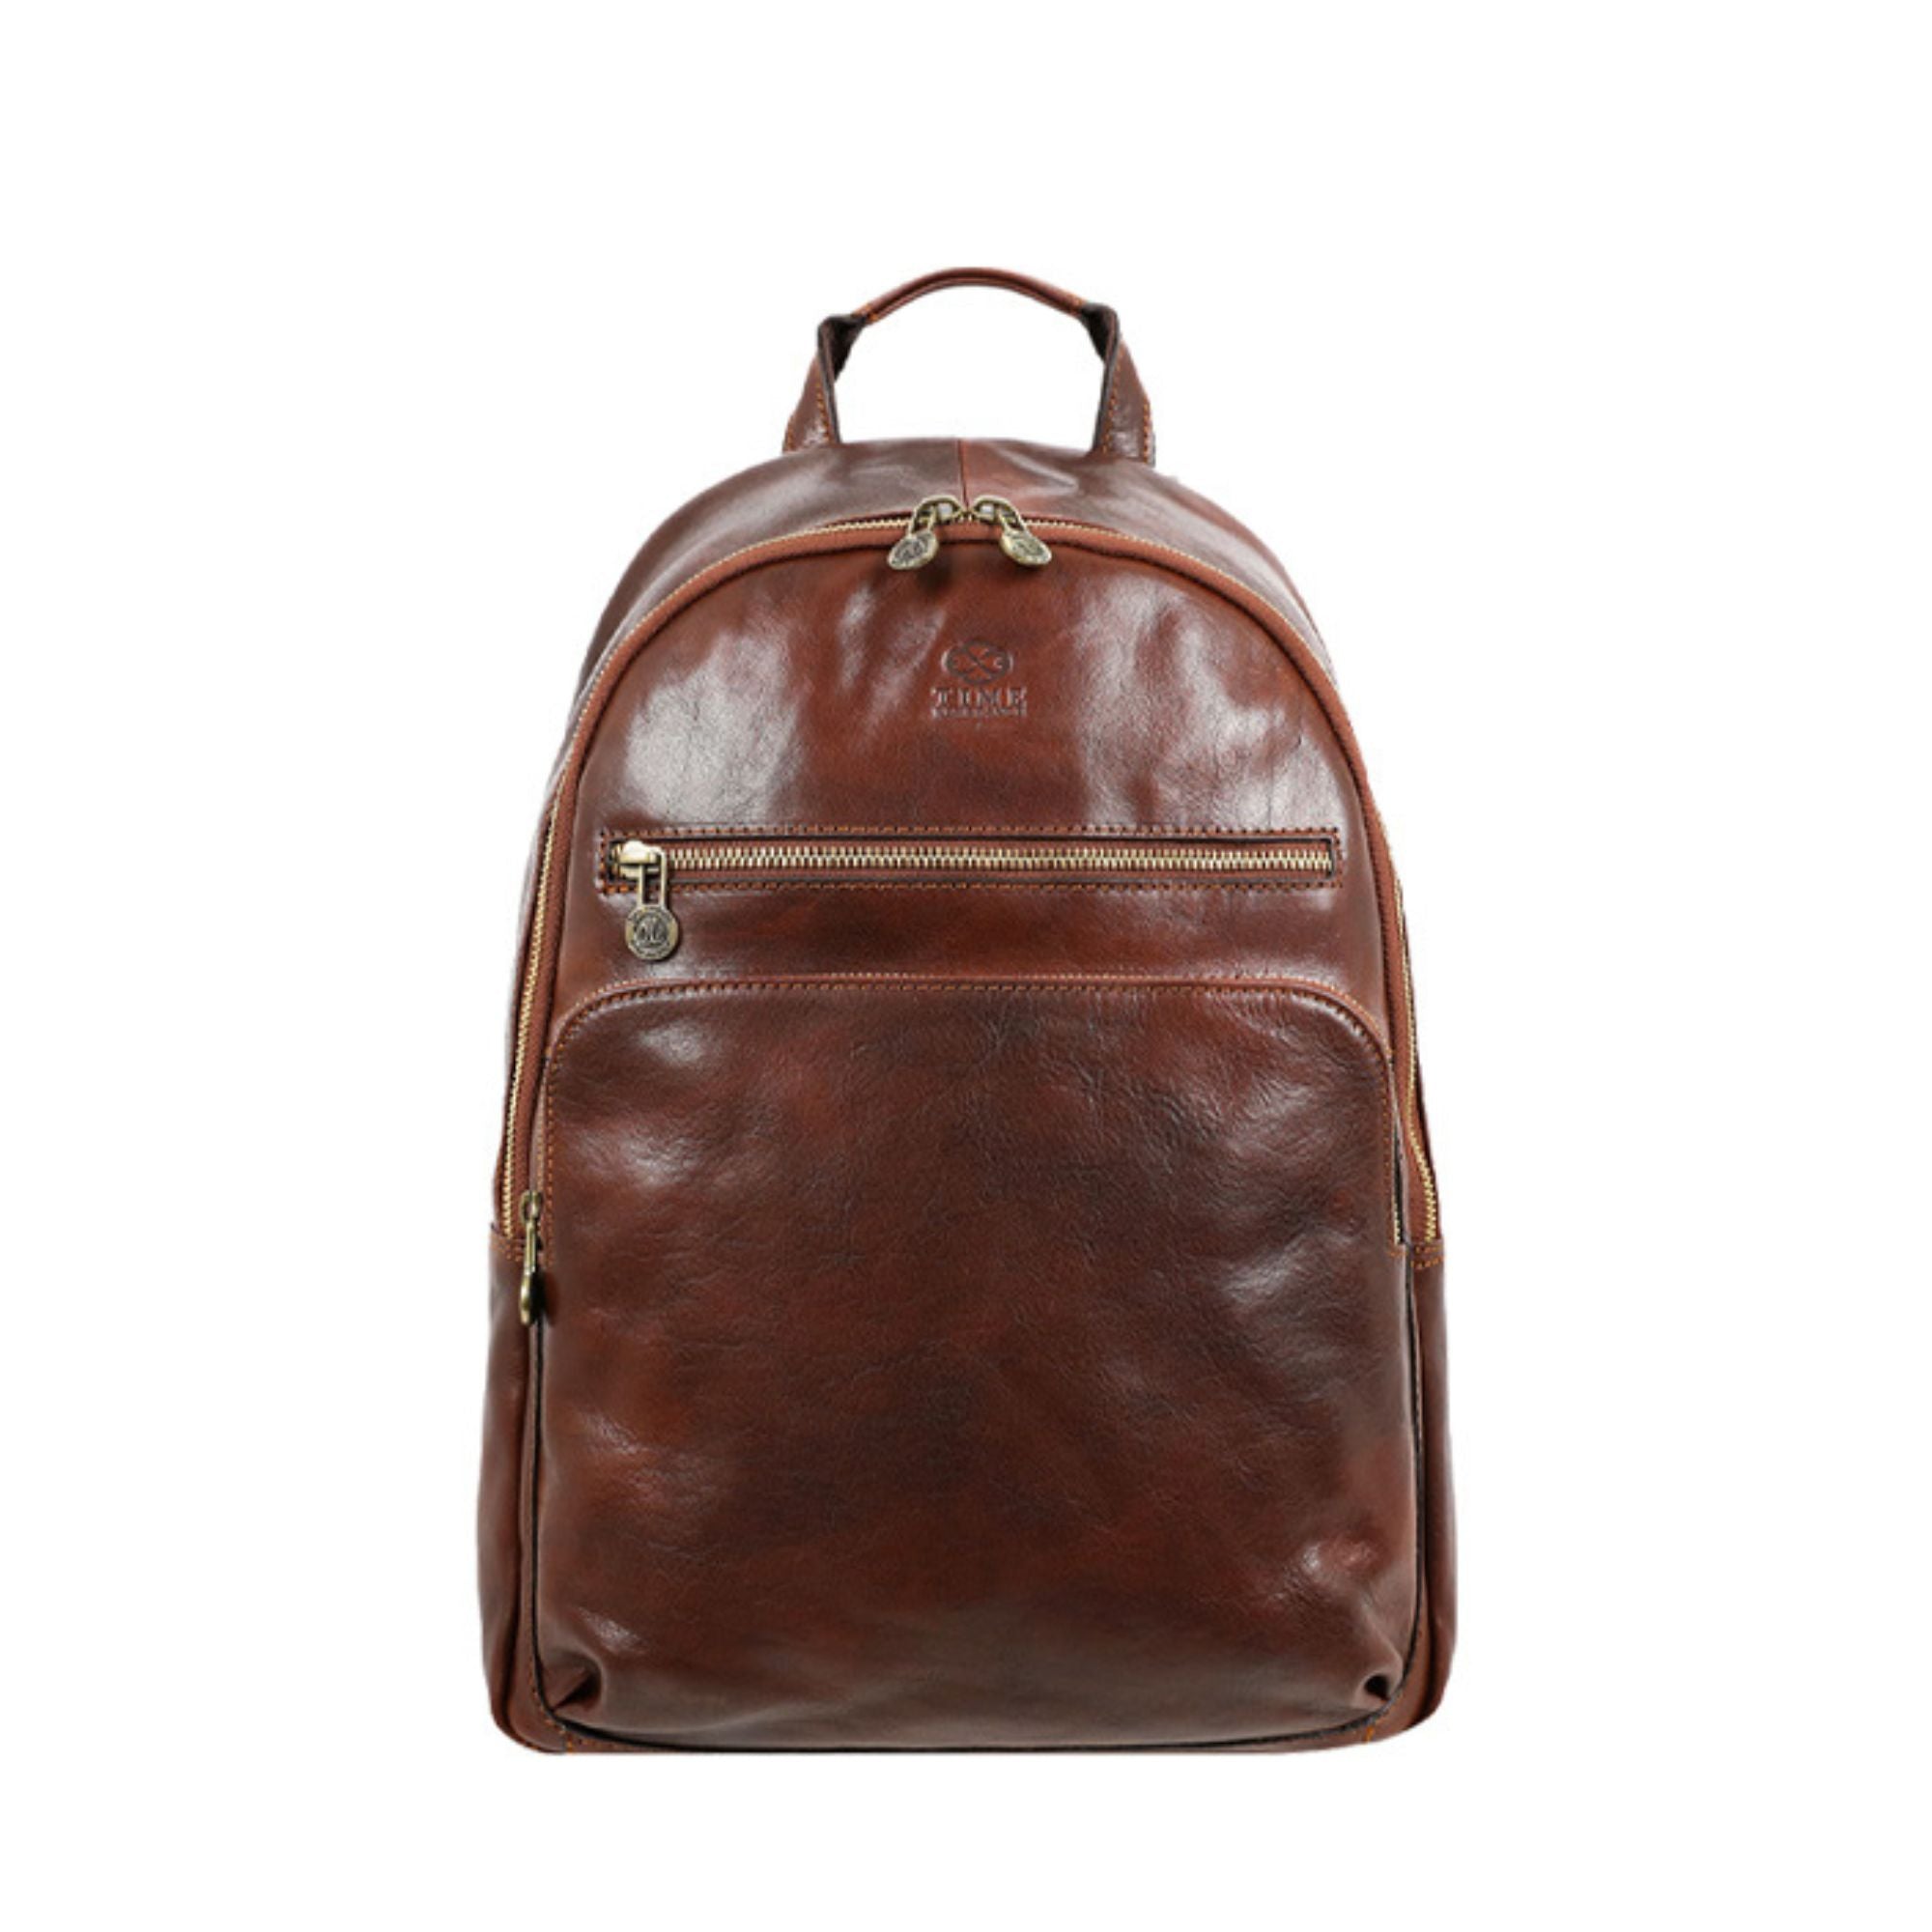 Leather Backpack - I, Claudius – Time Resistance